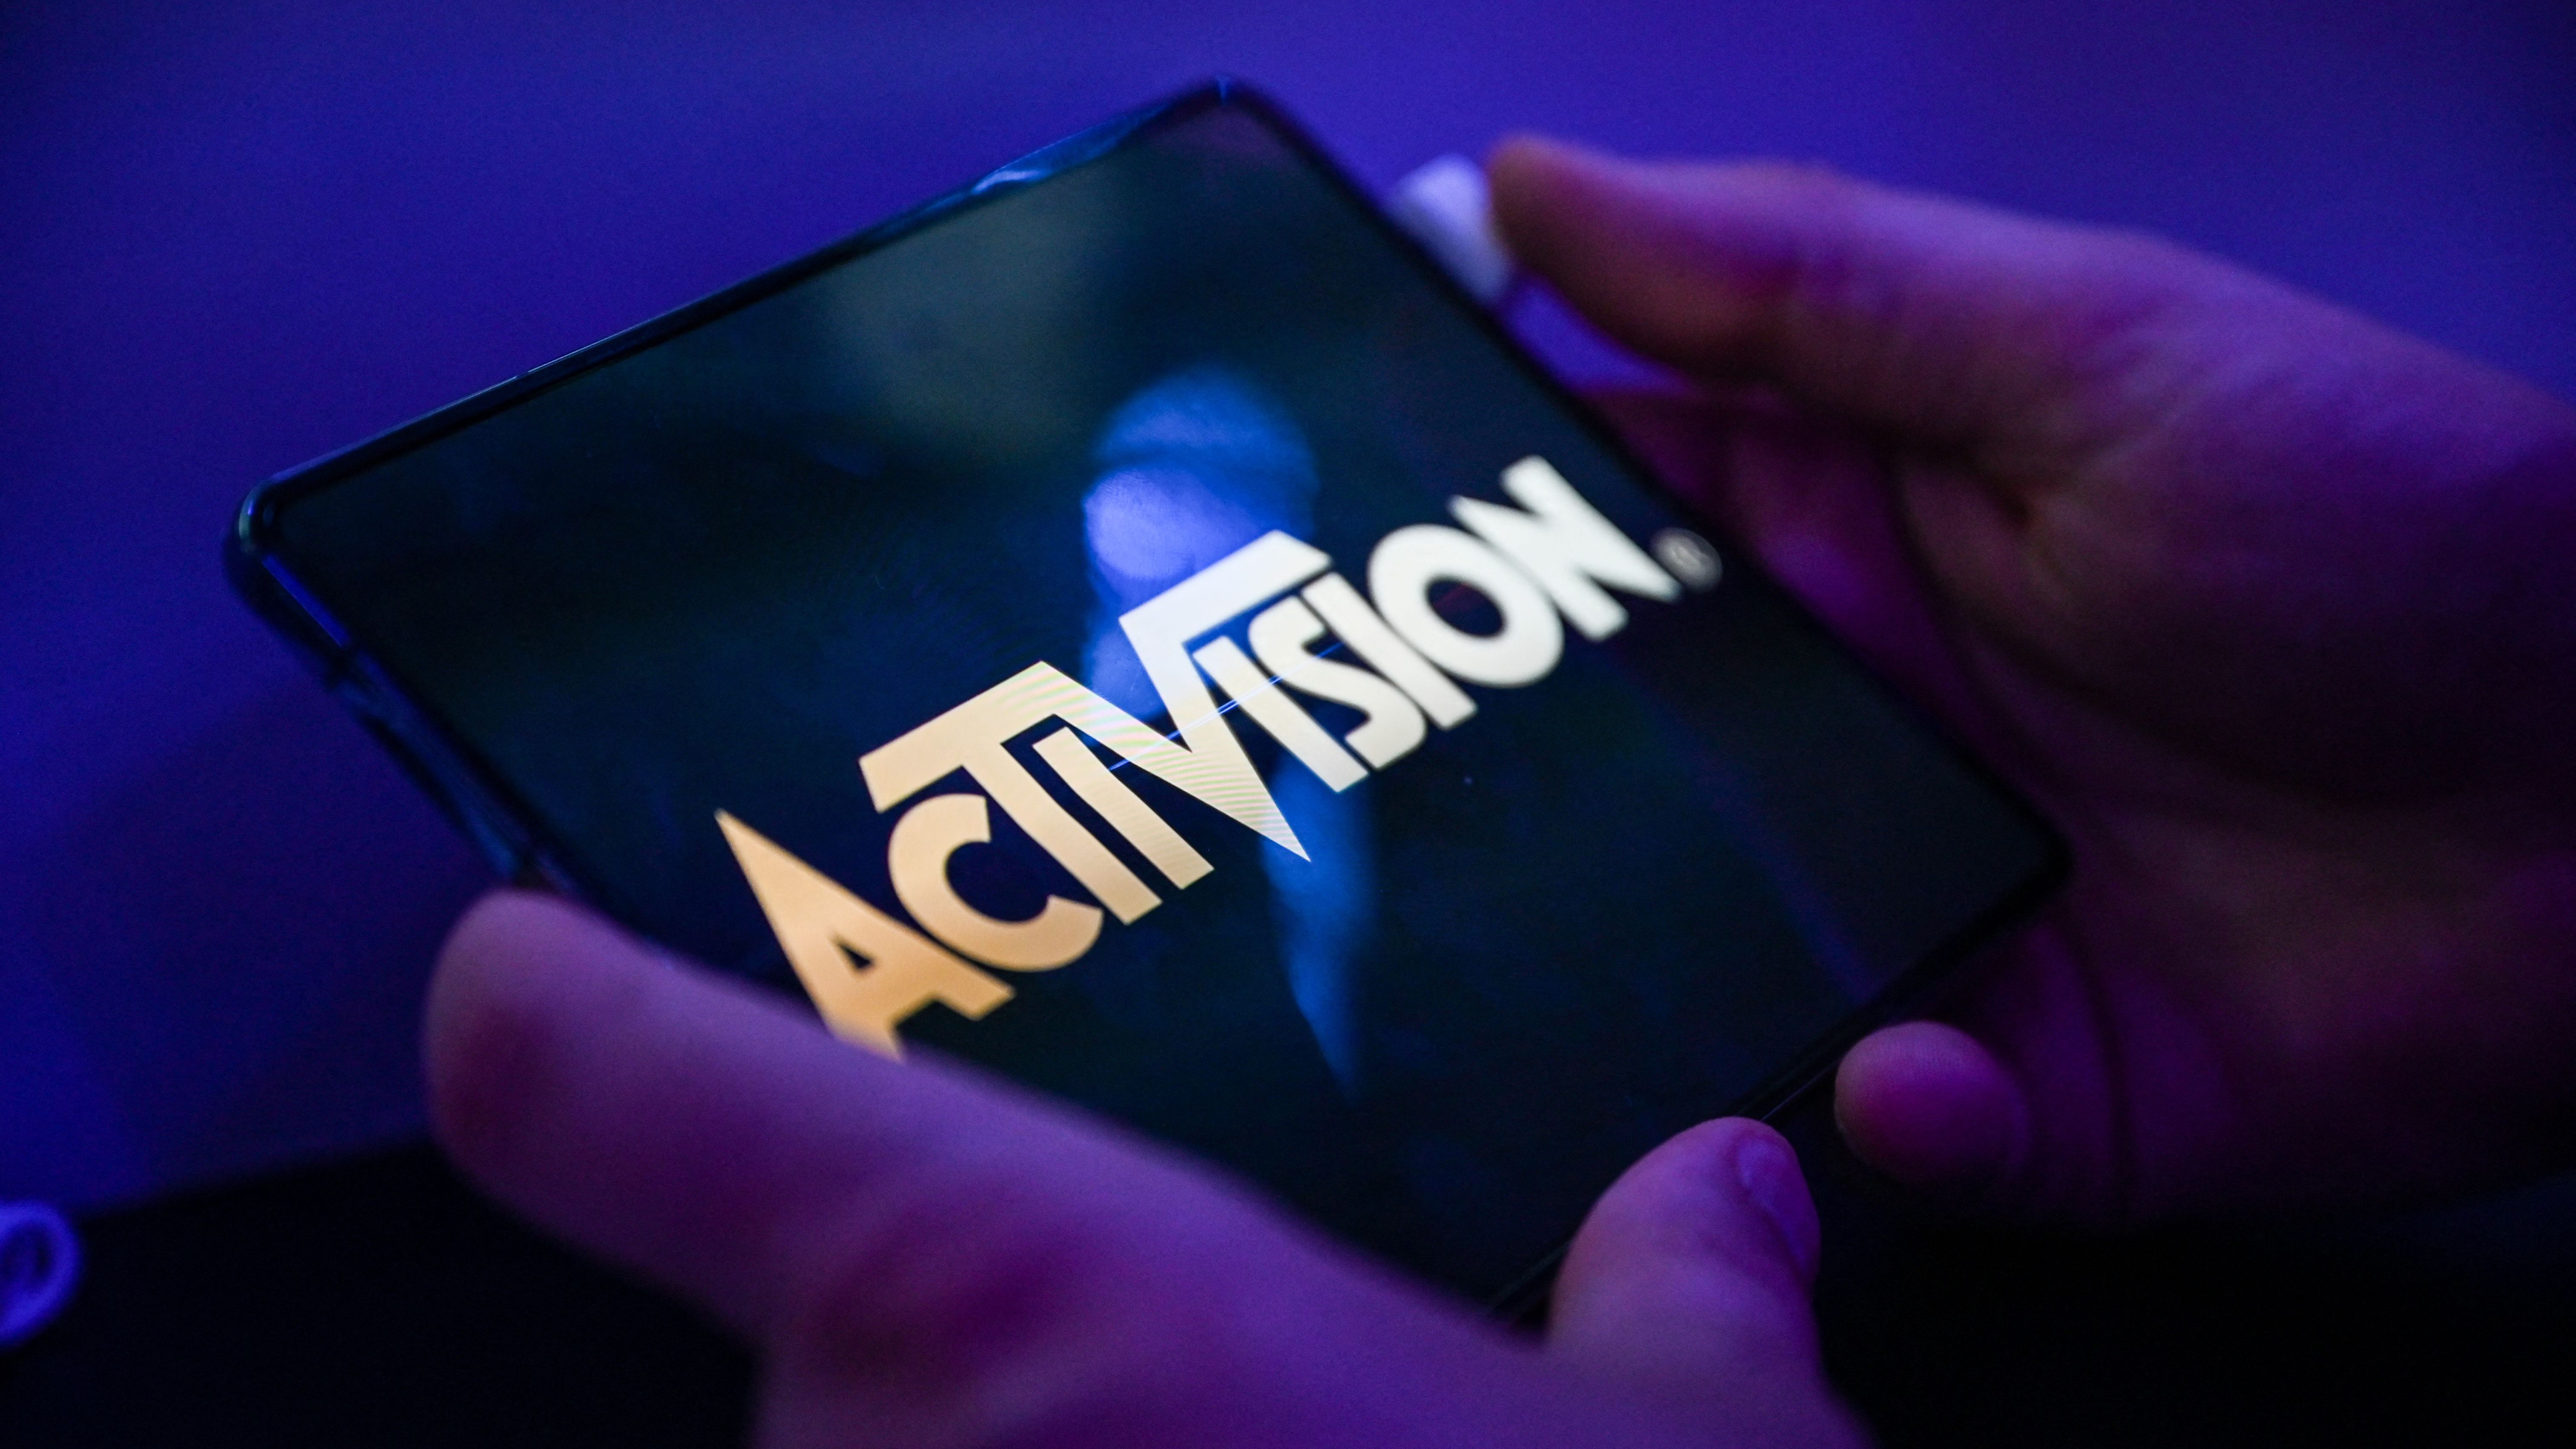 FTC to Continue Challenging Microsoft-Activision Deal